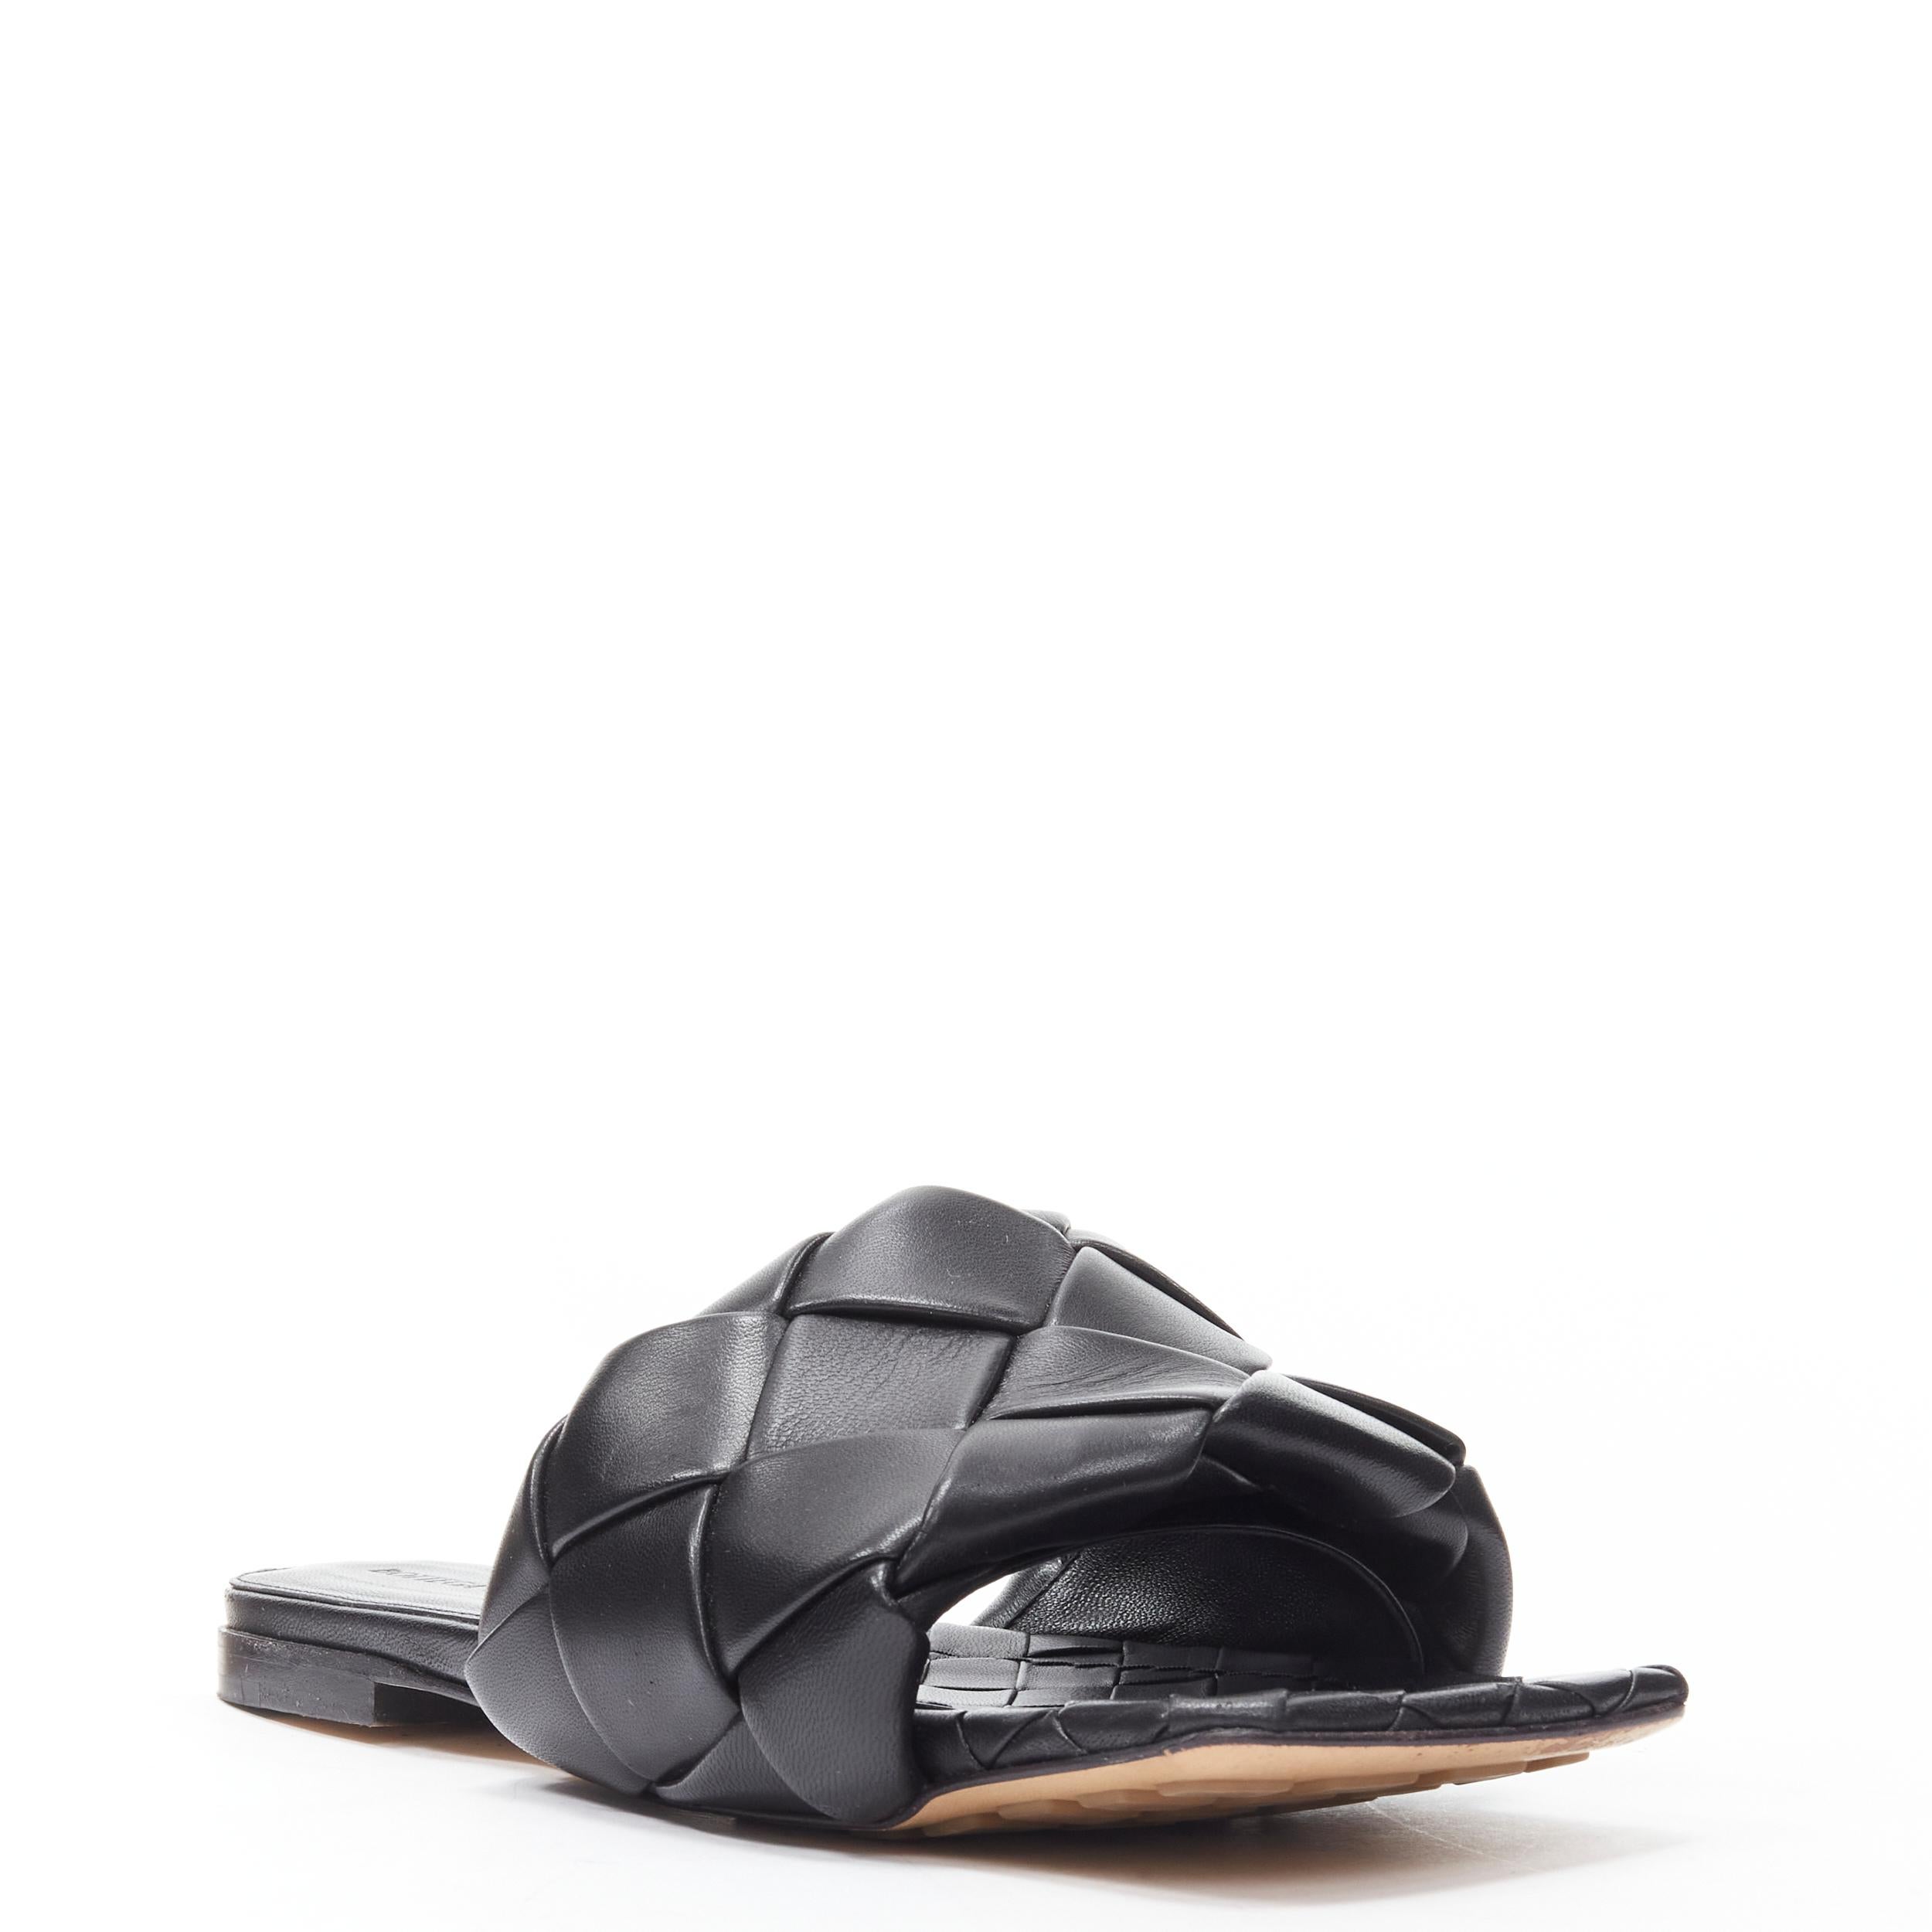 BOTTEGA VENETA Lido black padded Intrecciato woven square toe slides EU38.5
Reference: MELK/A00205
Brand: Bottega Veneta
Model: Lido
Material: Leather
Color: Black
Pattern: Solid
Made in: Italy

CONDITION:
Condition: Excellent, this item was